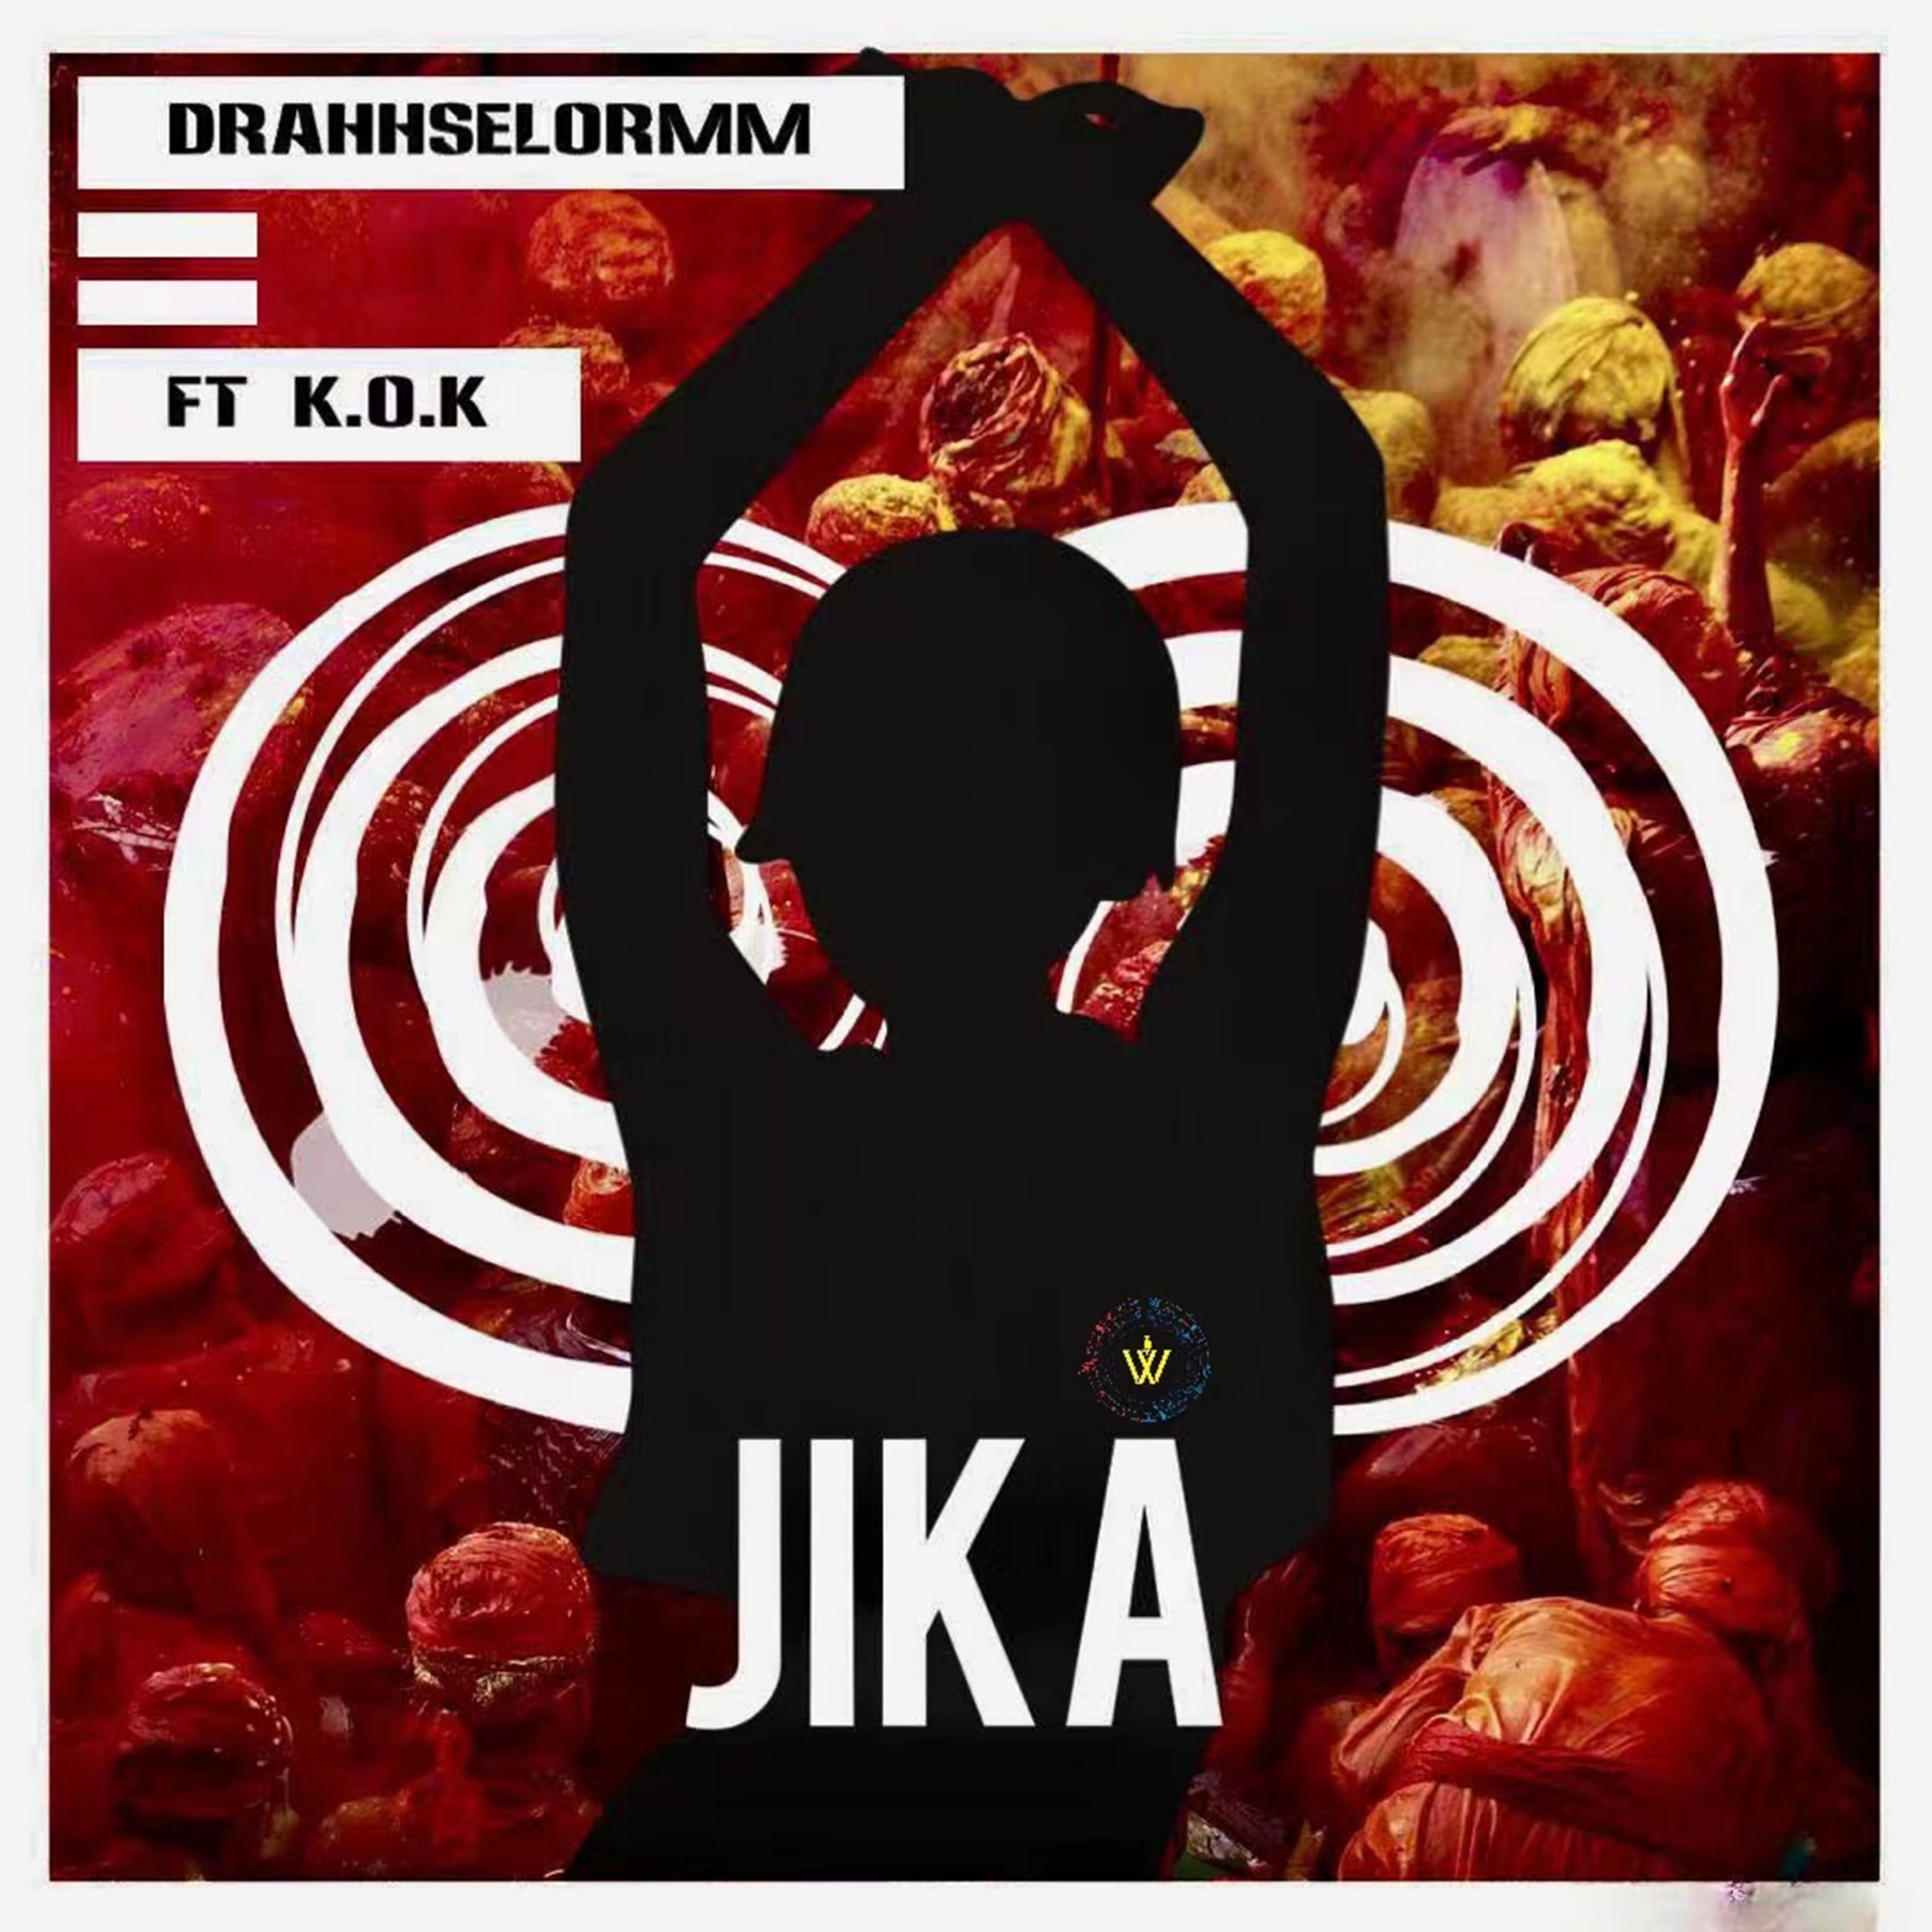 The new single ‘Jika’ from ‘Drahhselormm’ with its pounding drums and world music meets Amapiano sentiment is on the playlist now.